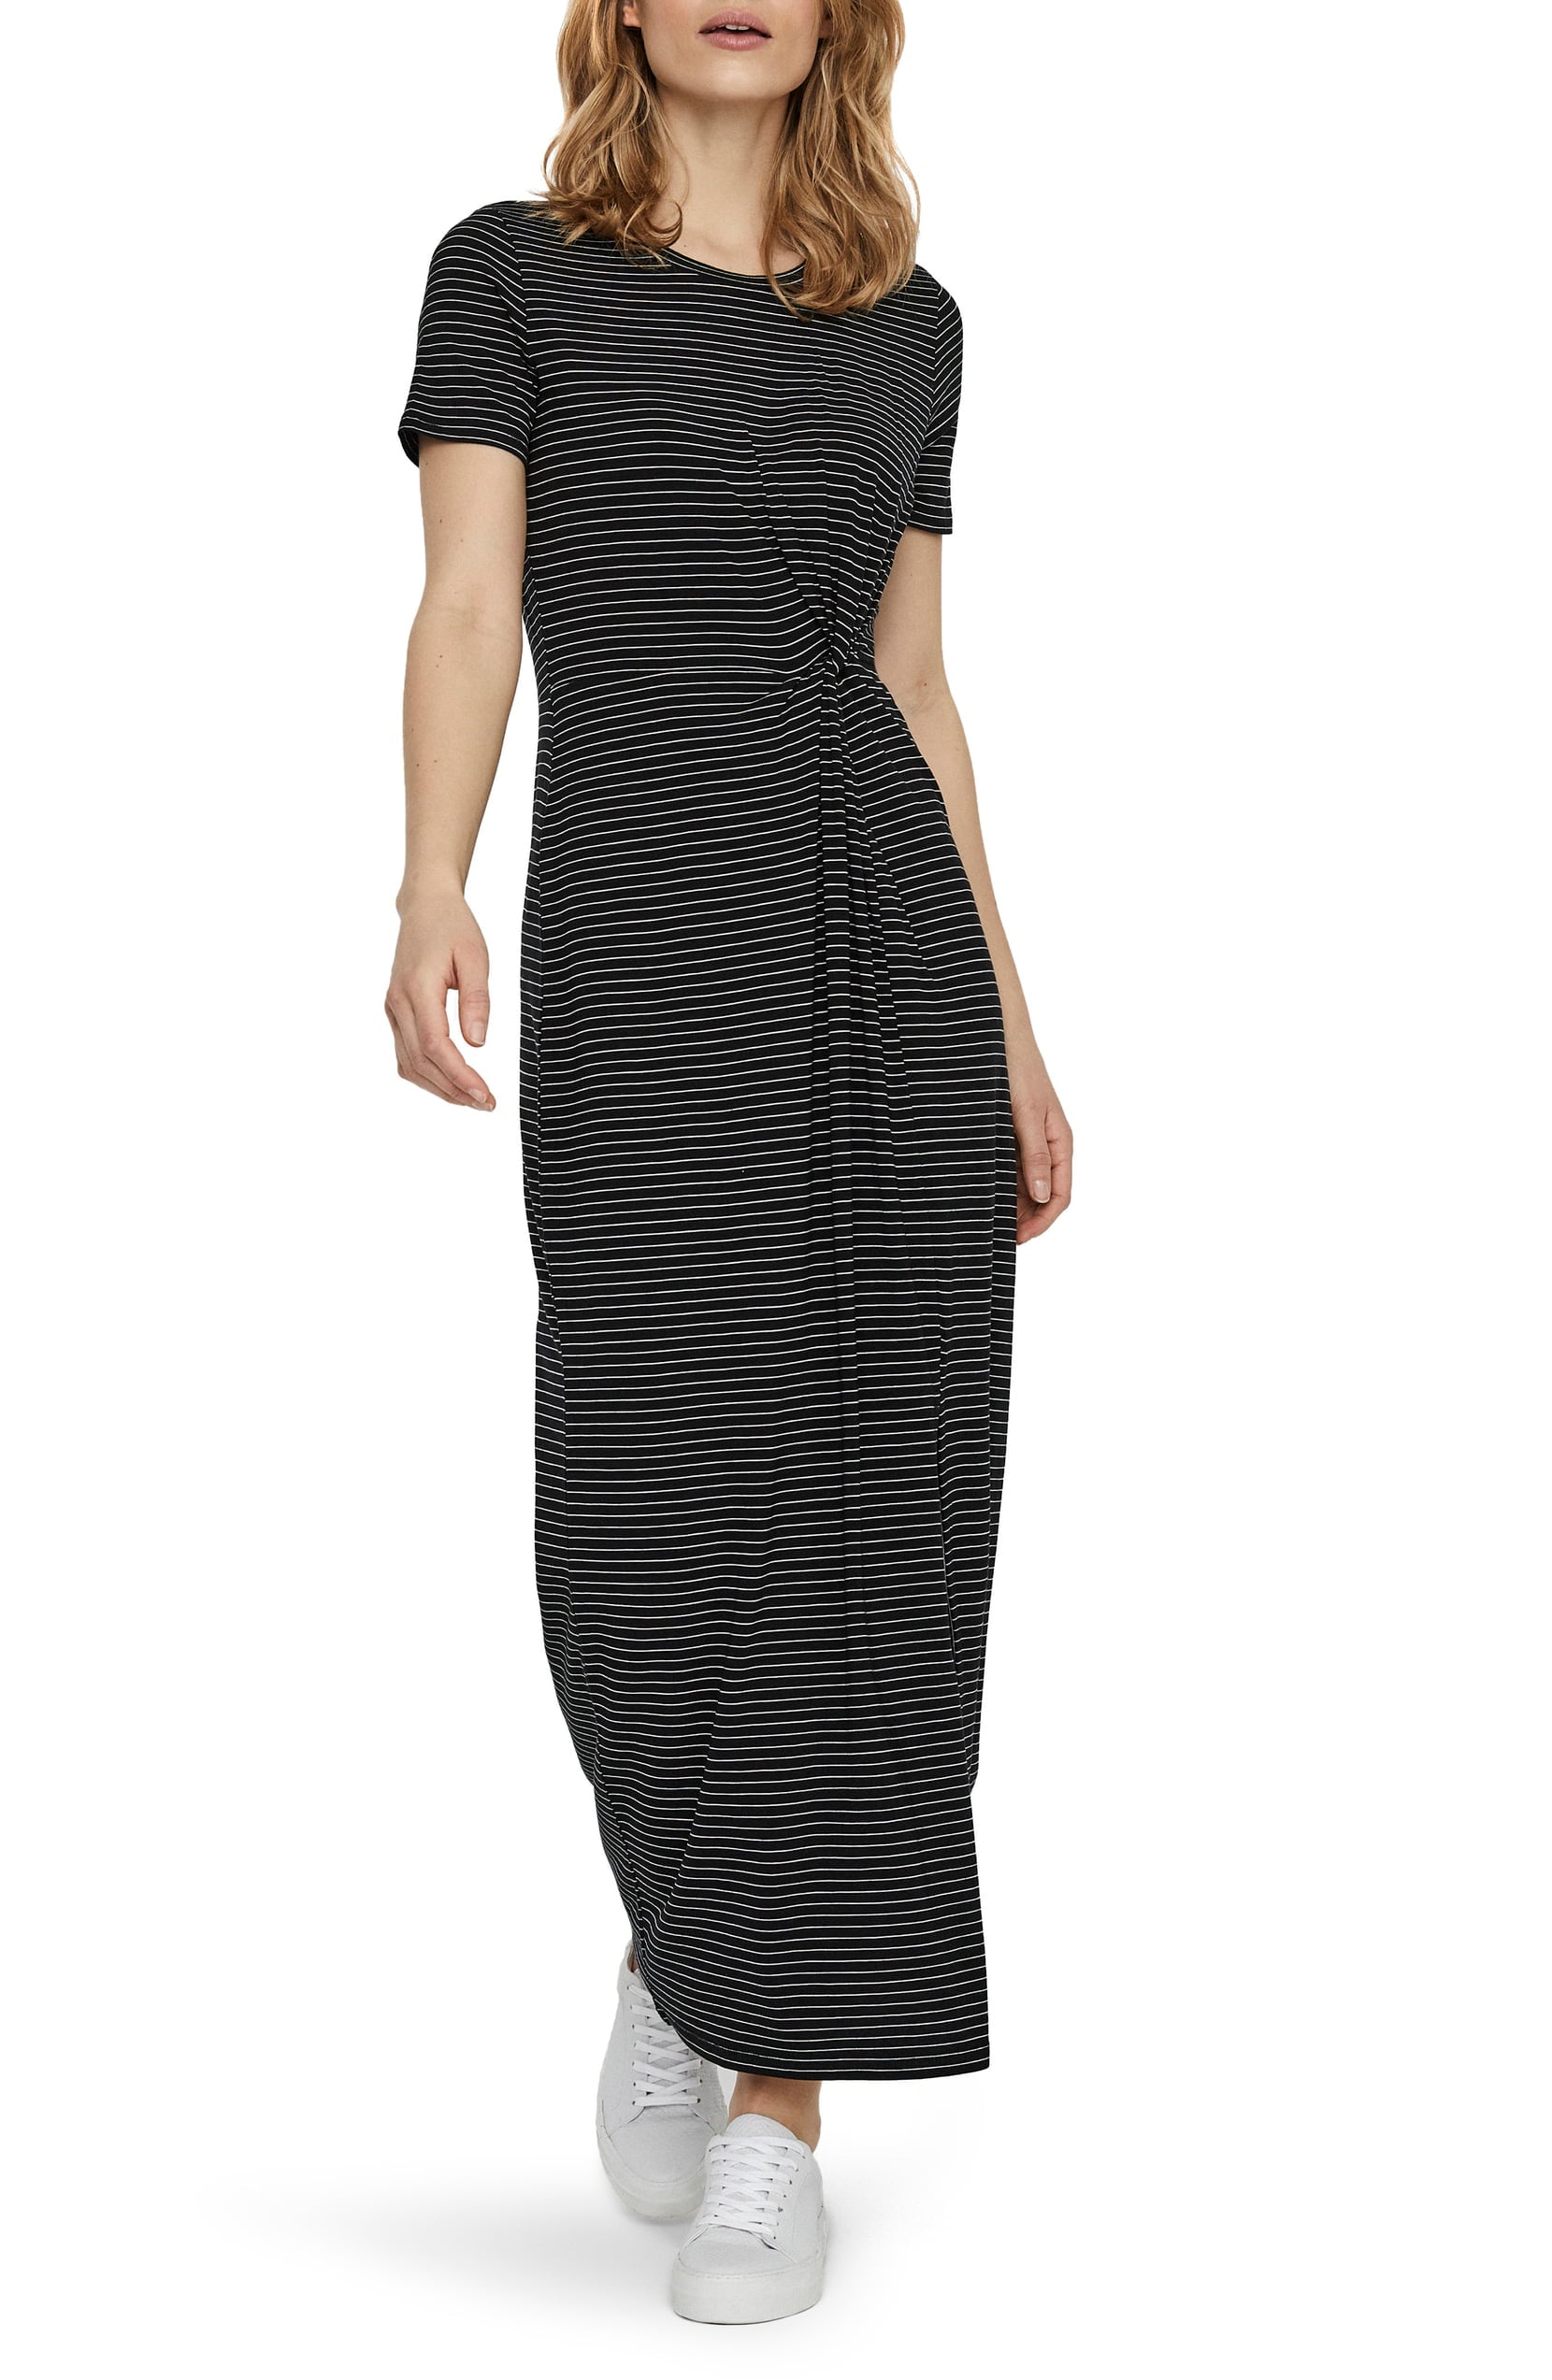 VERO MODA Ava Lulu Short-Sleeve Striped Dress The 32 Hottest New Pieces at Nordstrom This Month, Straight From a Editor | POPSUGAR Fashion Photo 30